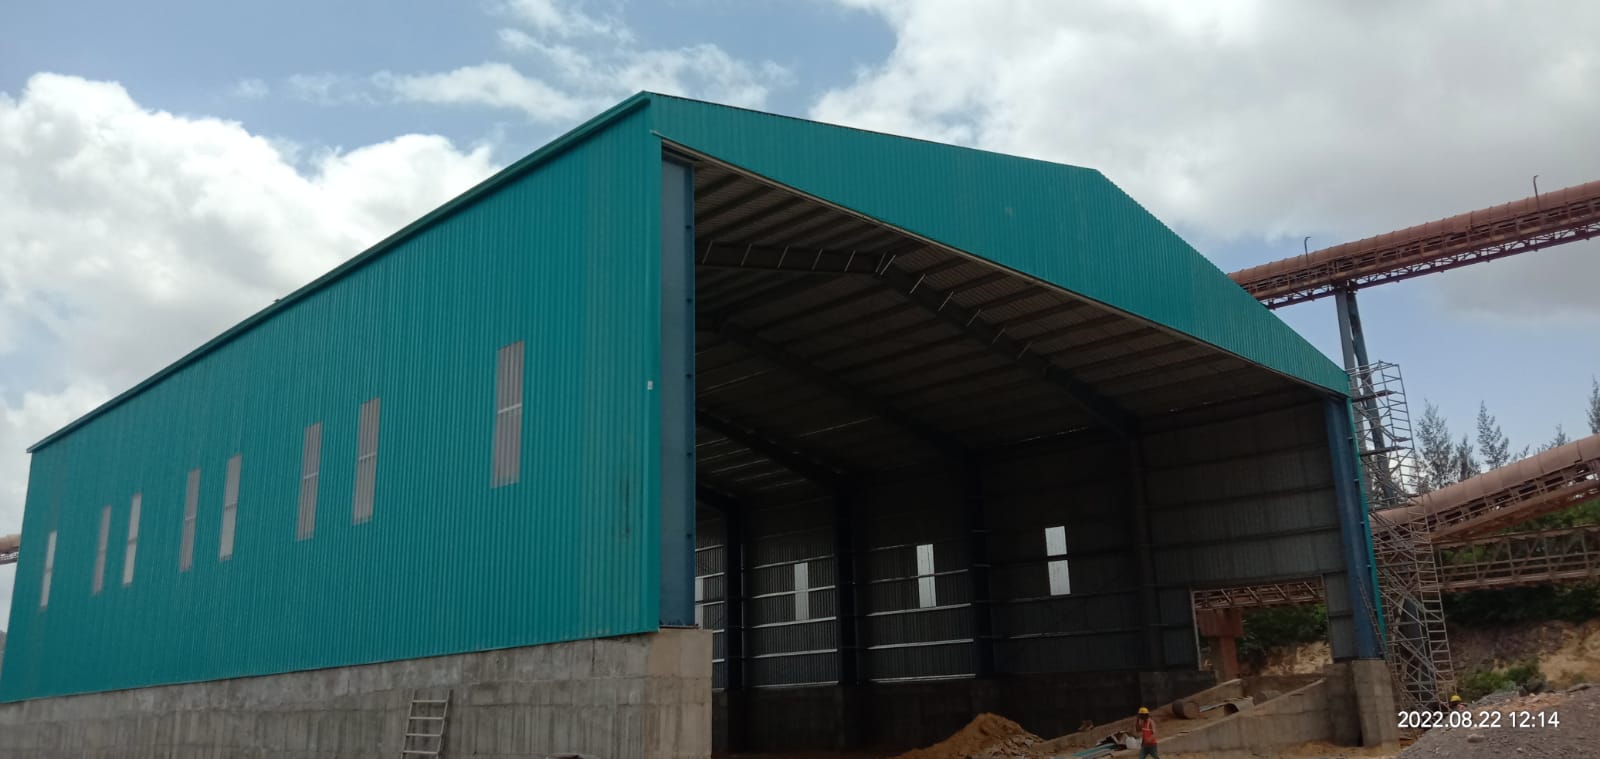 SriChakra PEB Structures, Peb Sheds Manufactures in Hyderabad, Sheds Manufactures in  Vijayawada, Peb Sheds Manufactures in Vizag, Peb Sheds Manufactures in Banglore